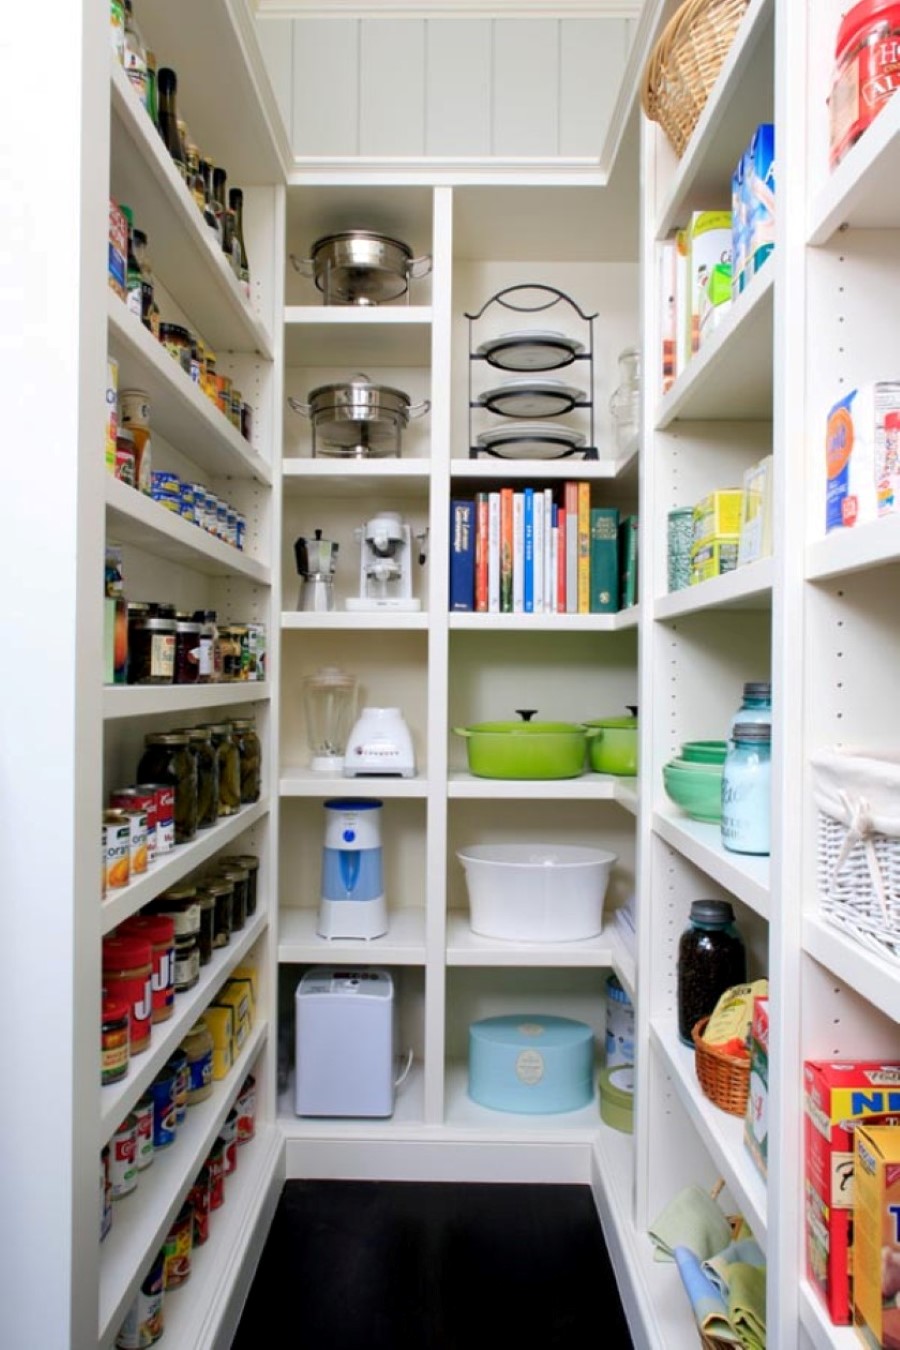 kitchen pantry shelving systems photo - 4